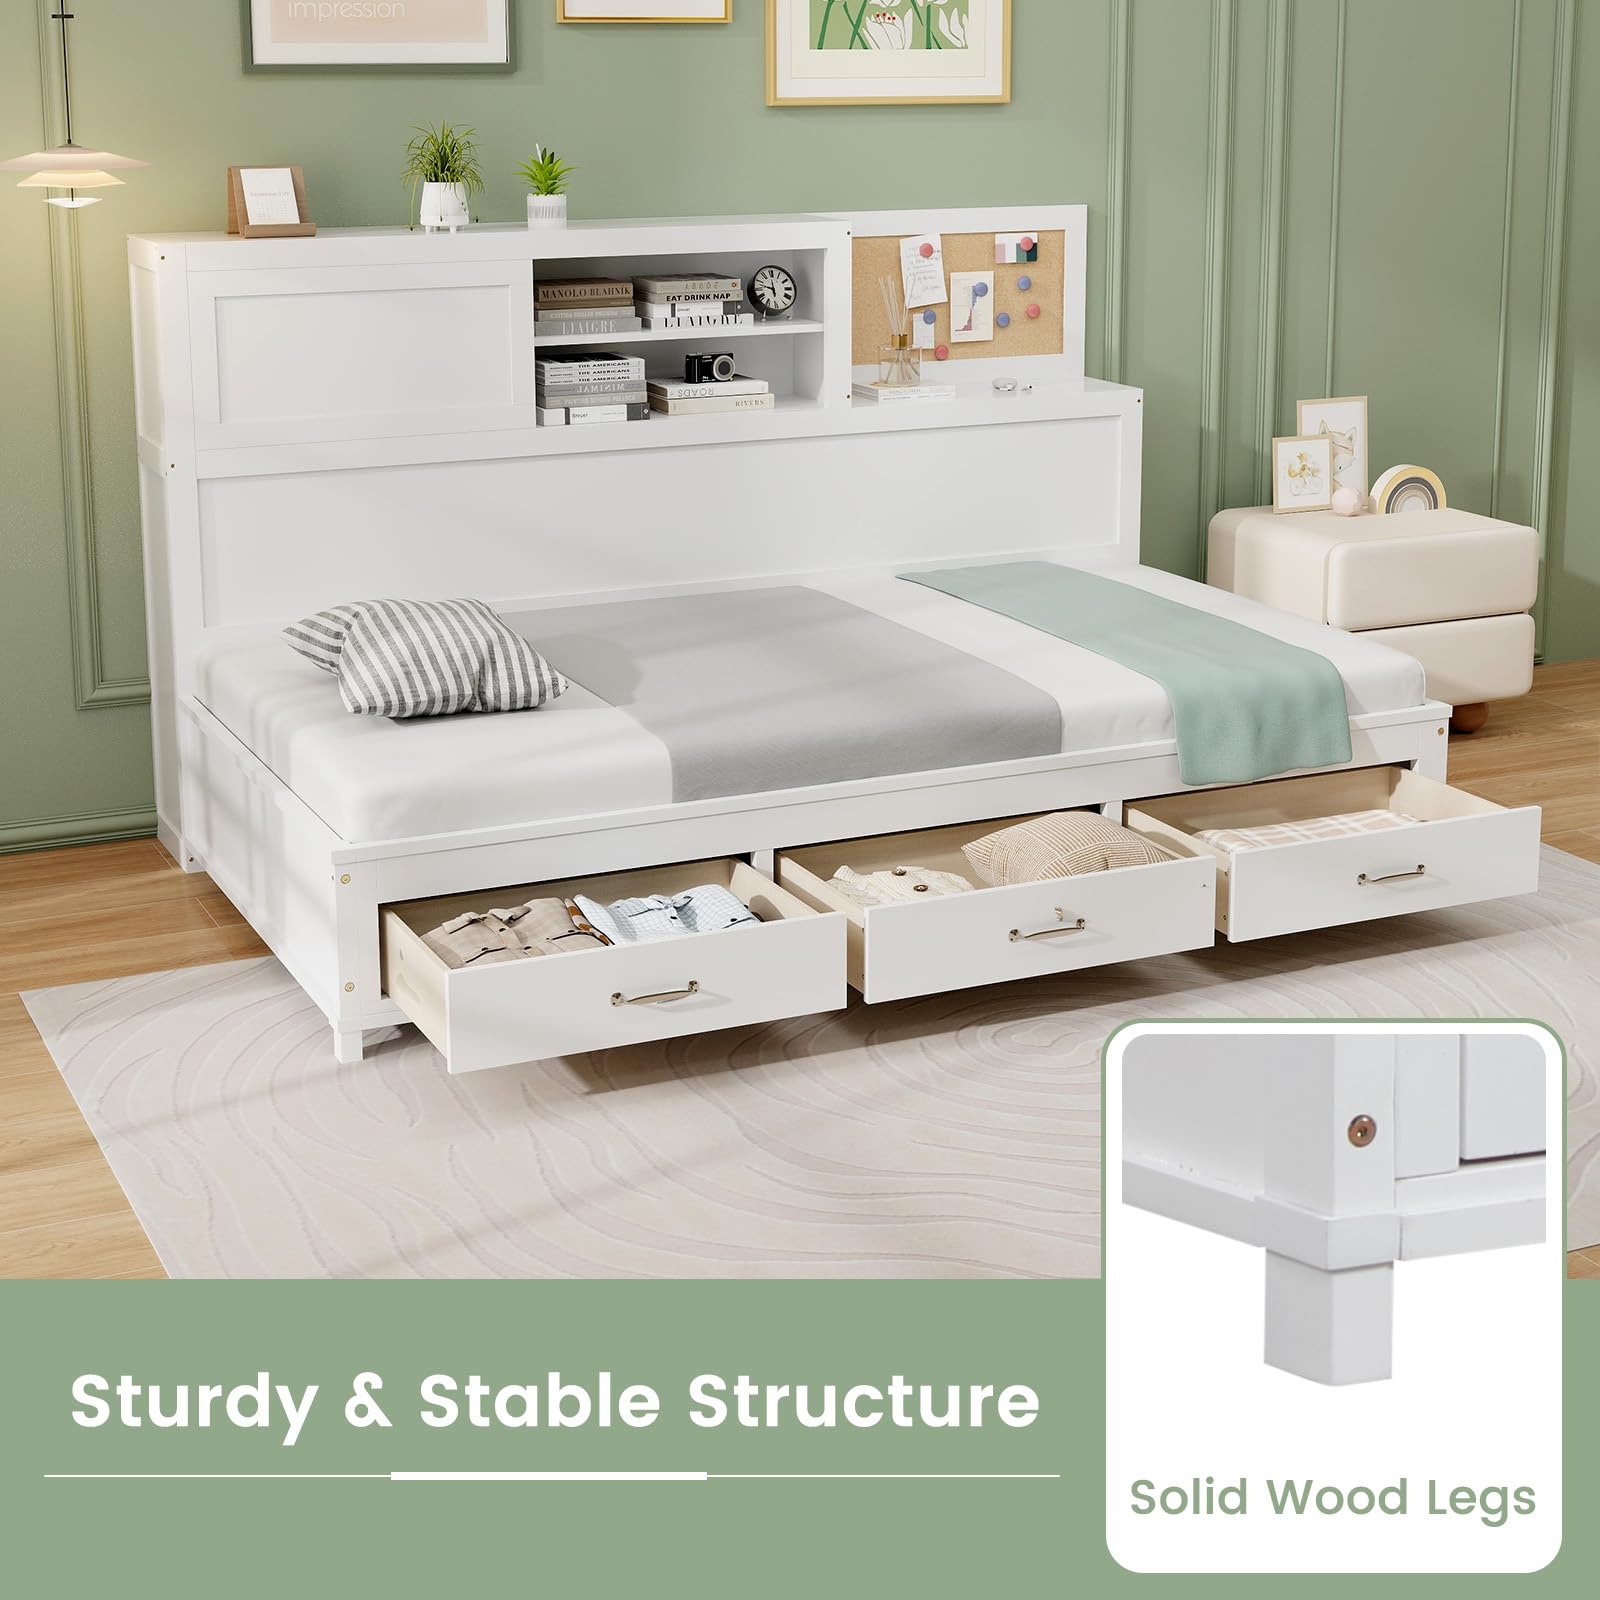 Giantex Daybed with 3 Storage Drawers